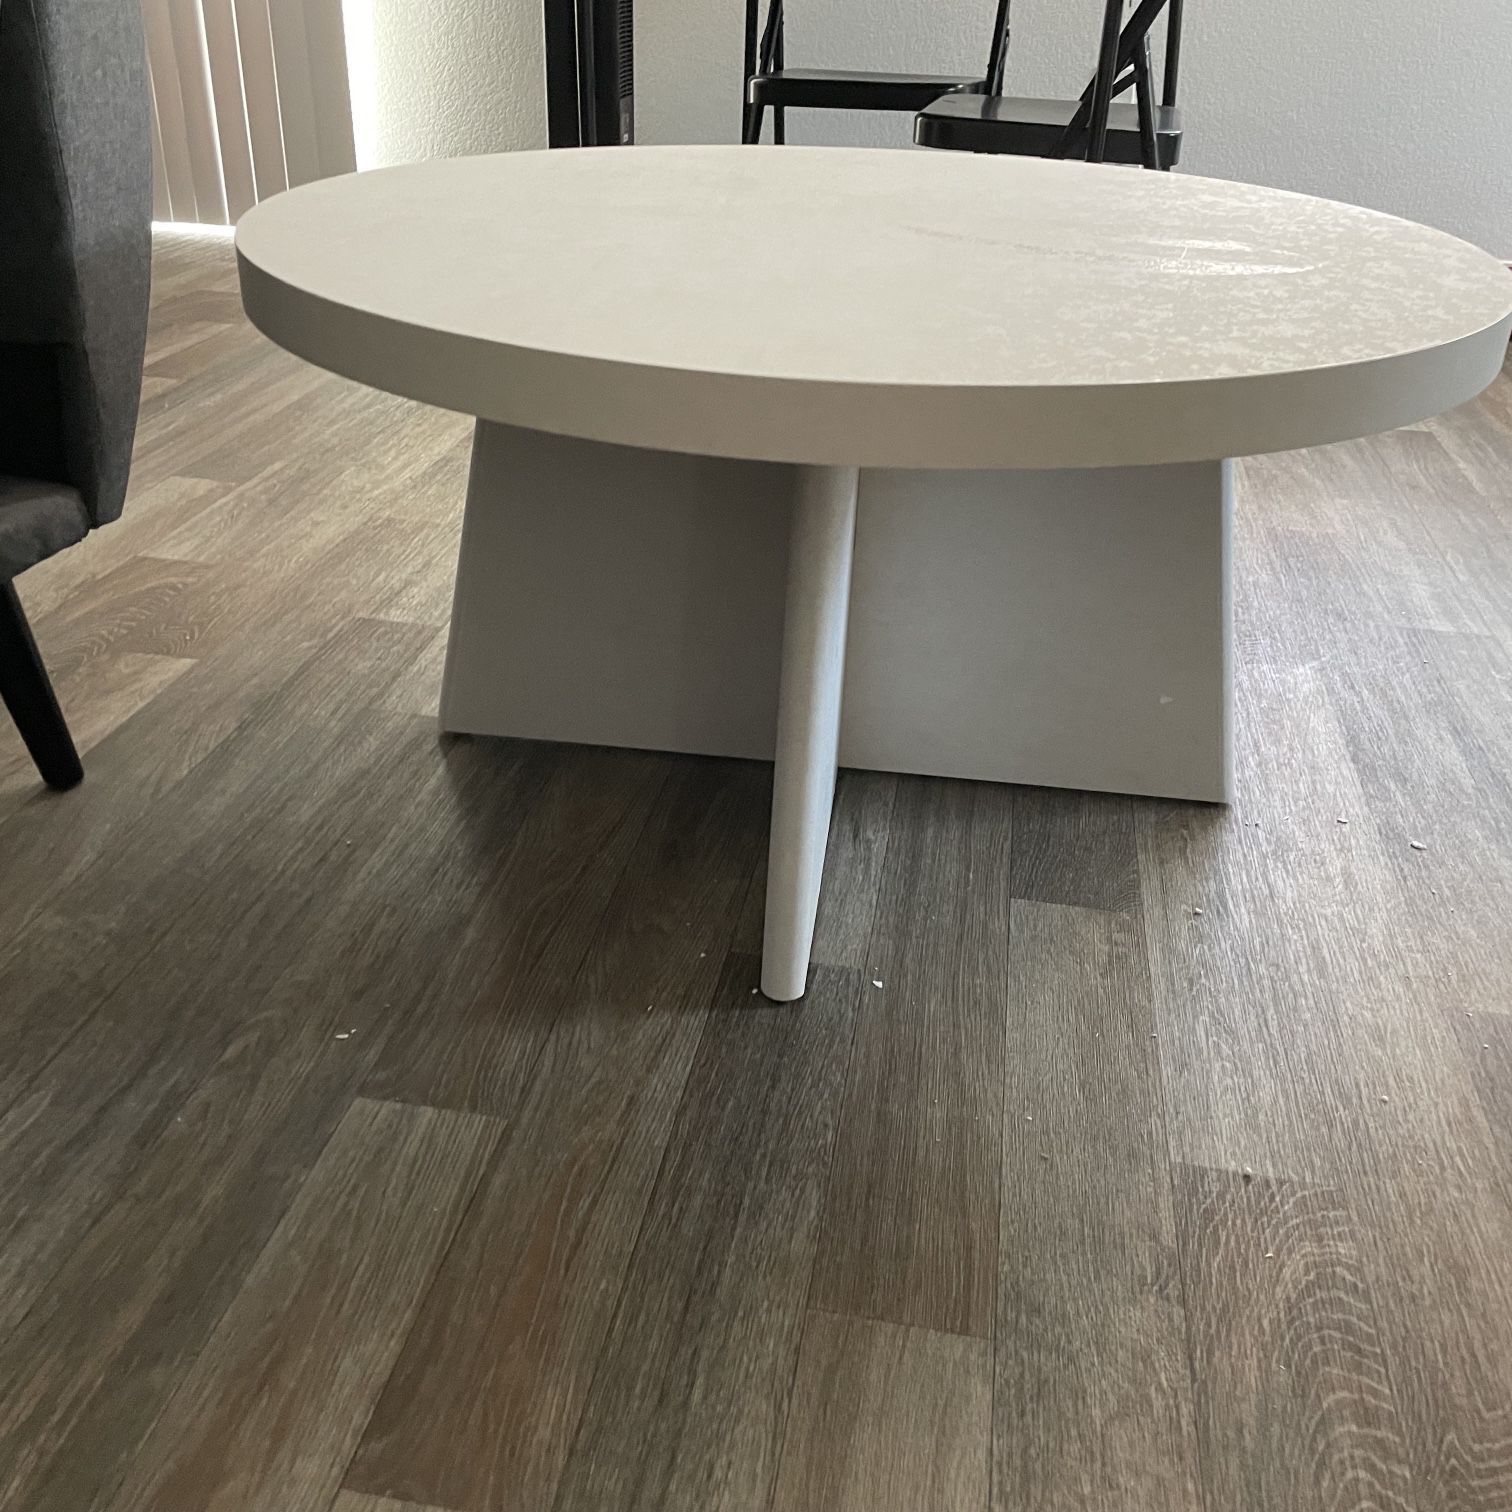 Queer Eye Liam Round Coffee Table For Sale In North Las Vegas, Nv – Offerup With Liam Round Plaster Coffee Tables (View 12 of 15)